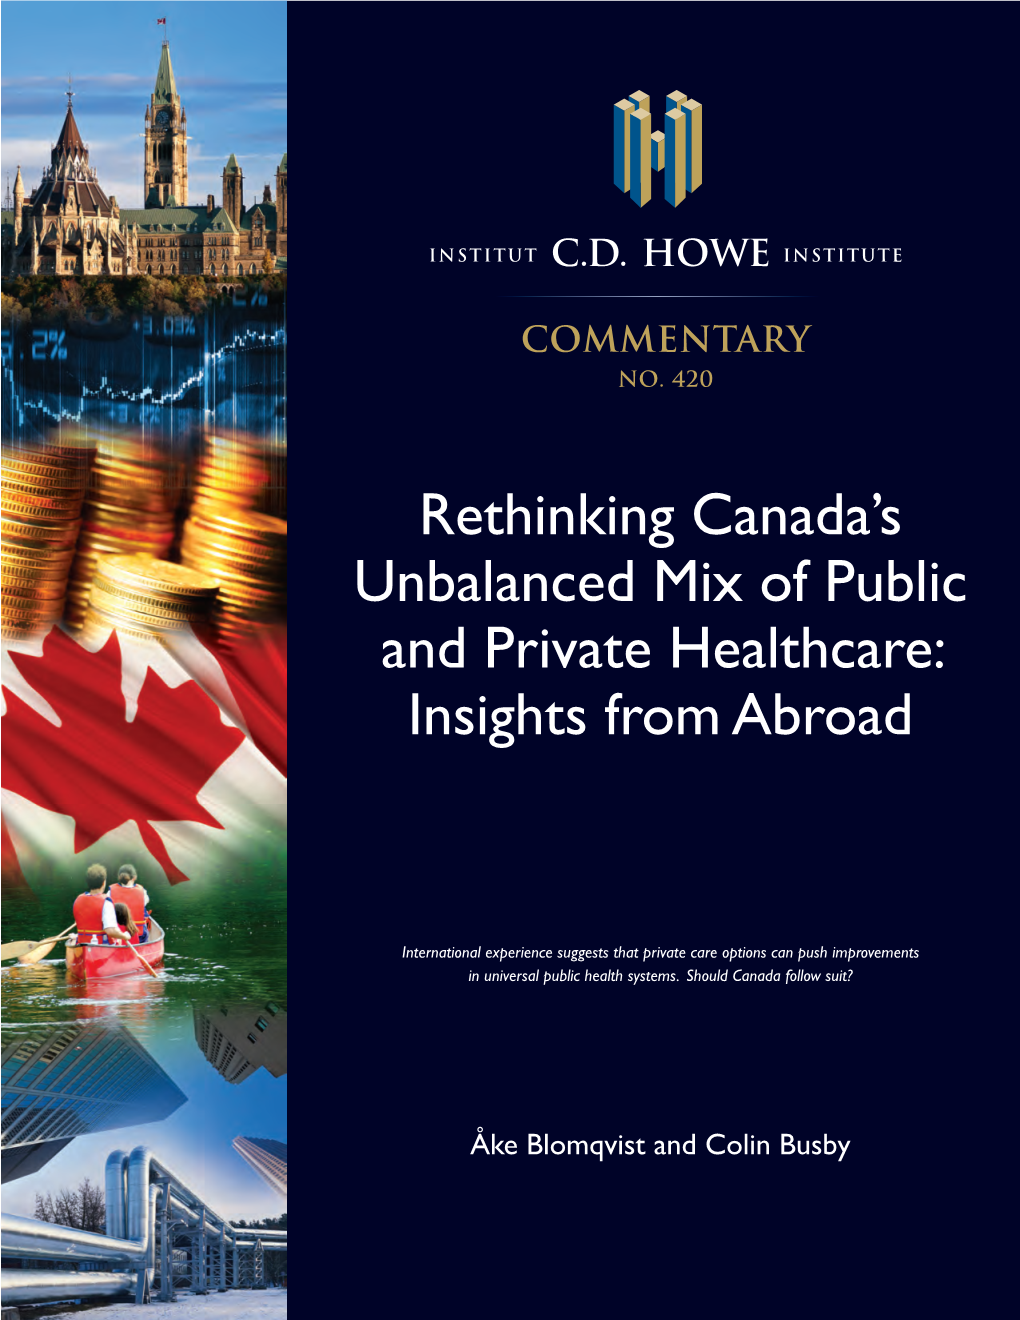 Rethinking Canada's Unbalanced Mix of Public and Private Healthcare